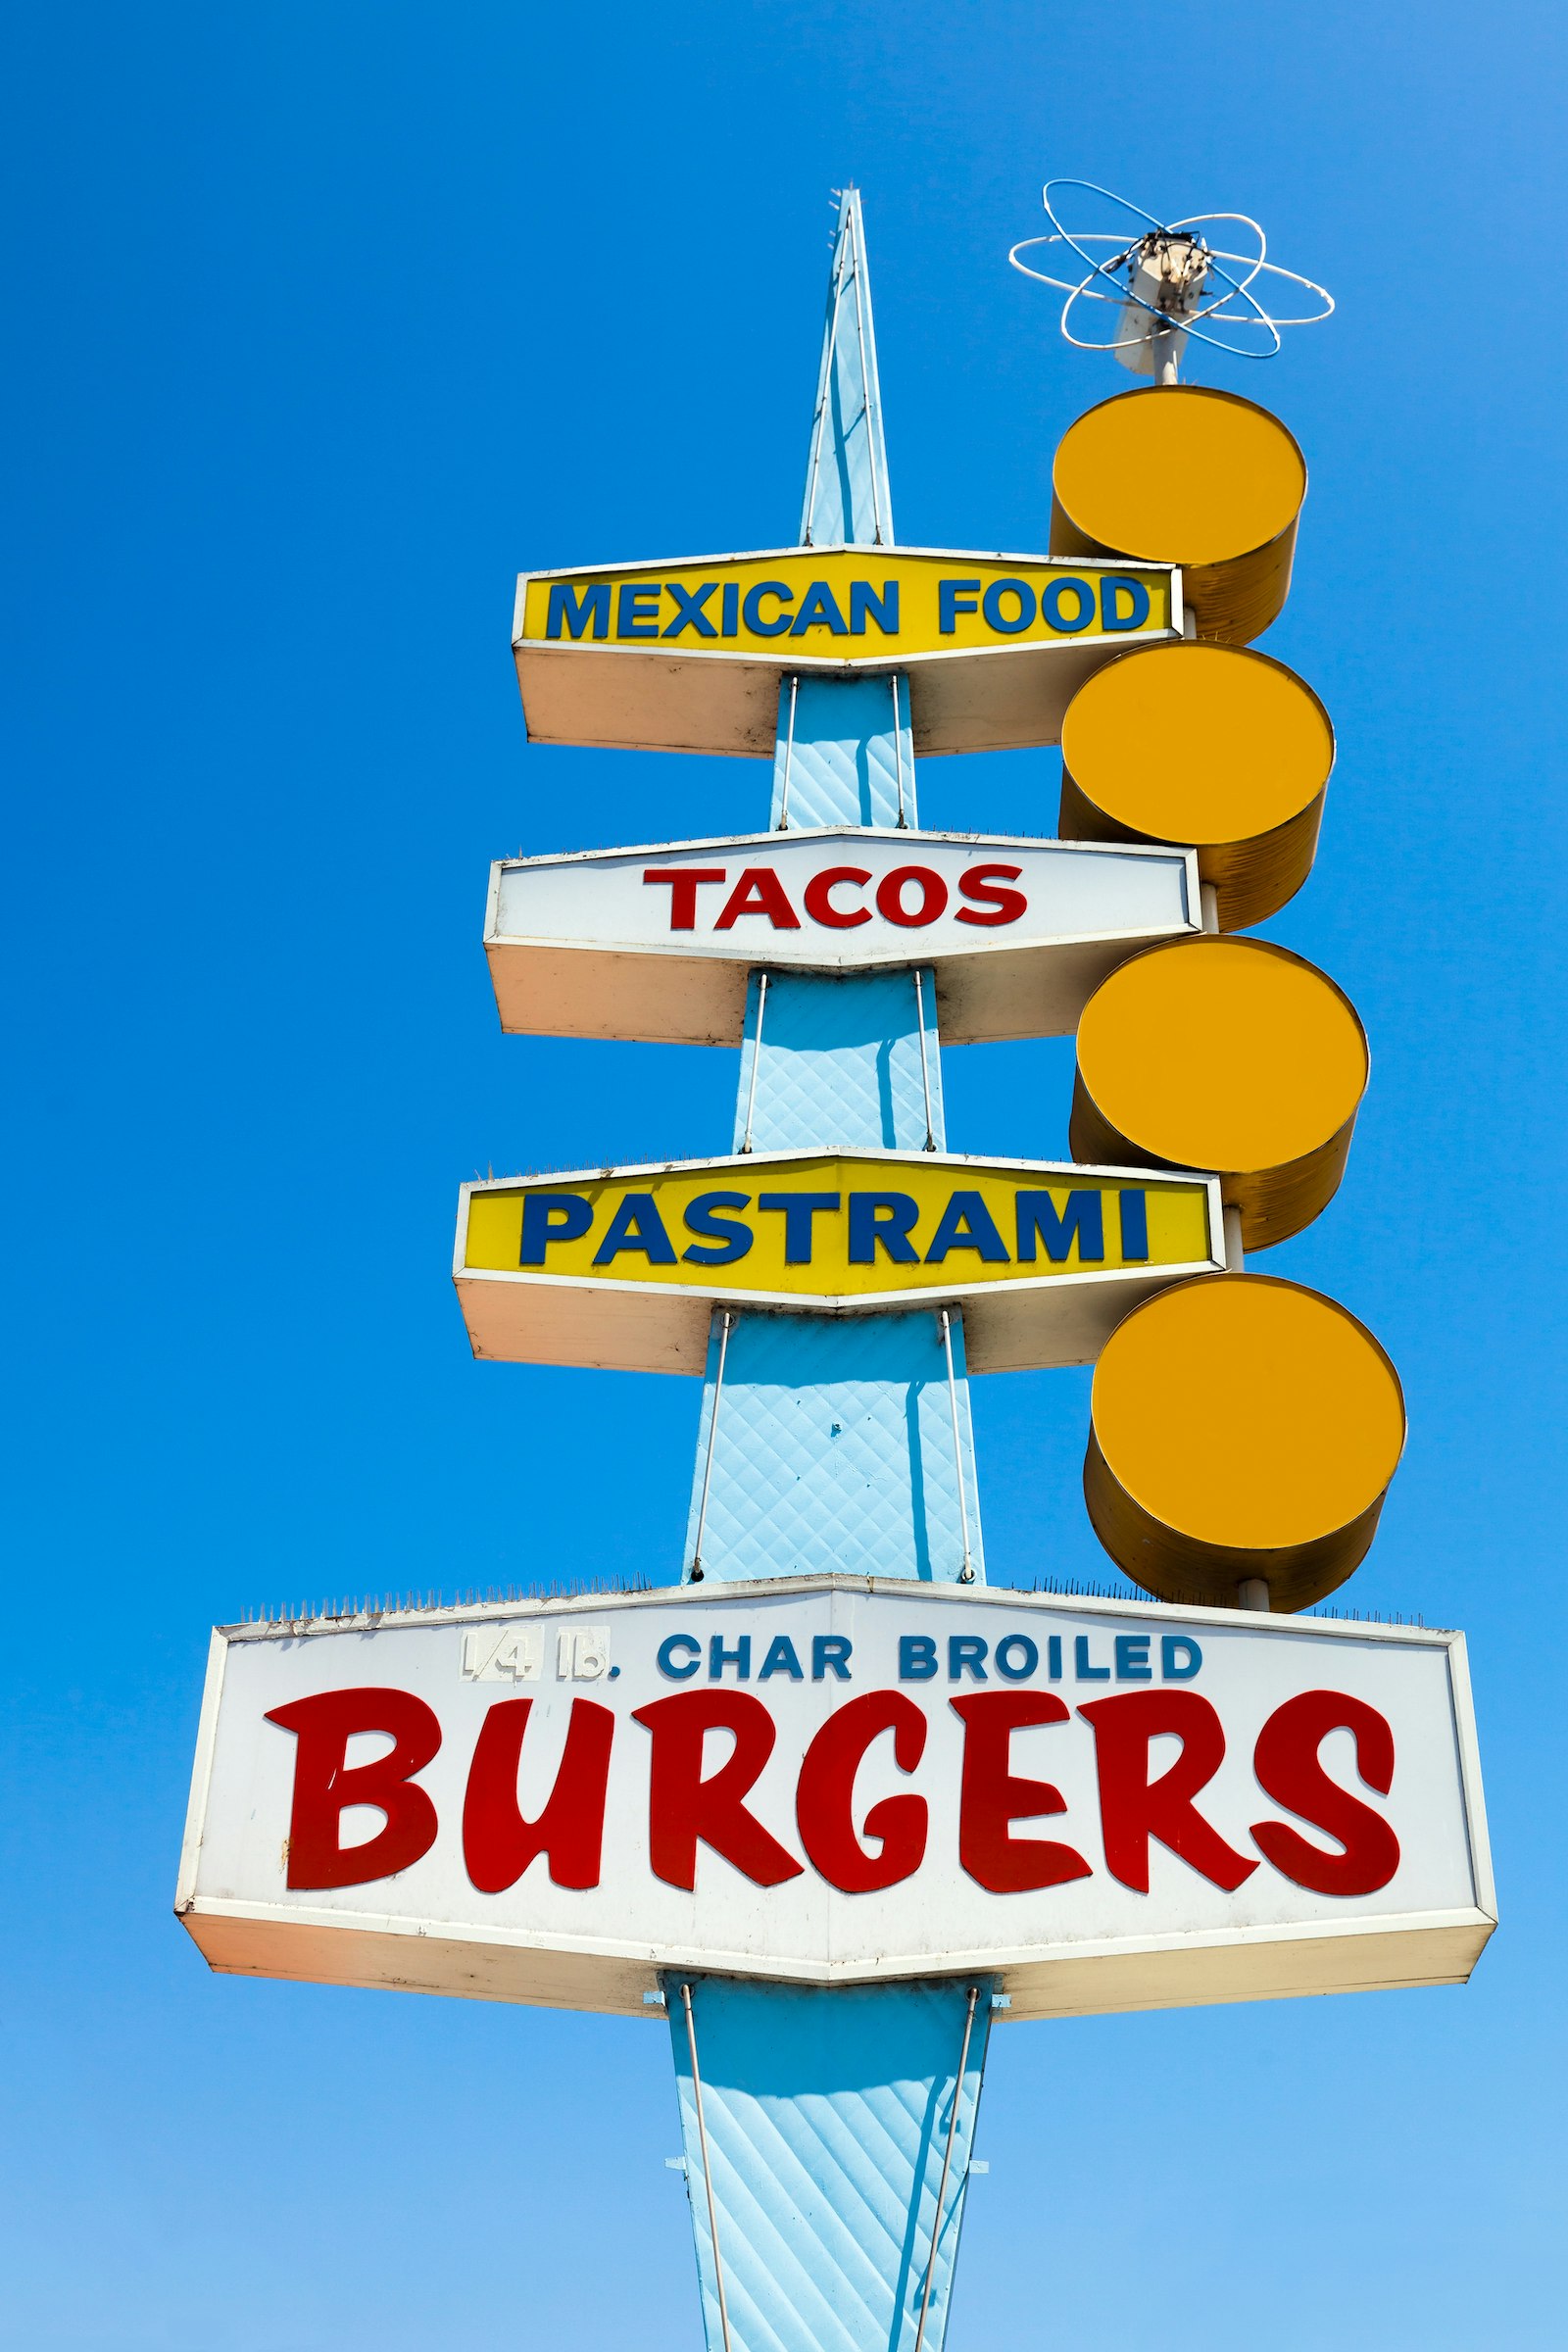 Diner sign advertising Mexican food, tacos, pastrami, and burger